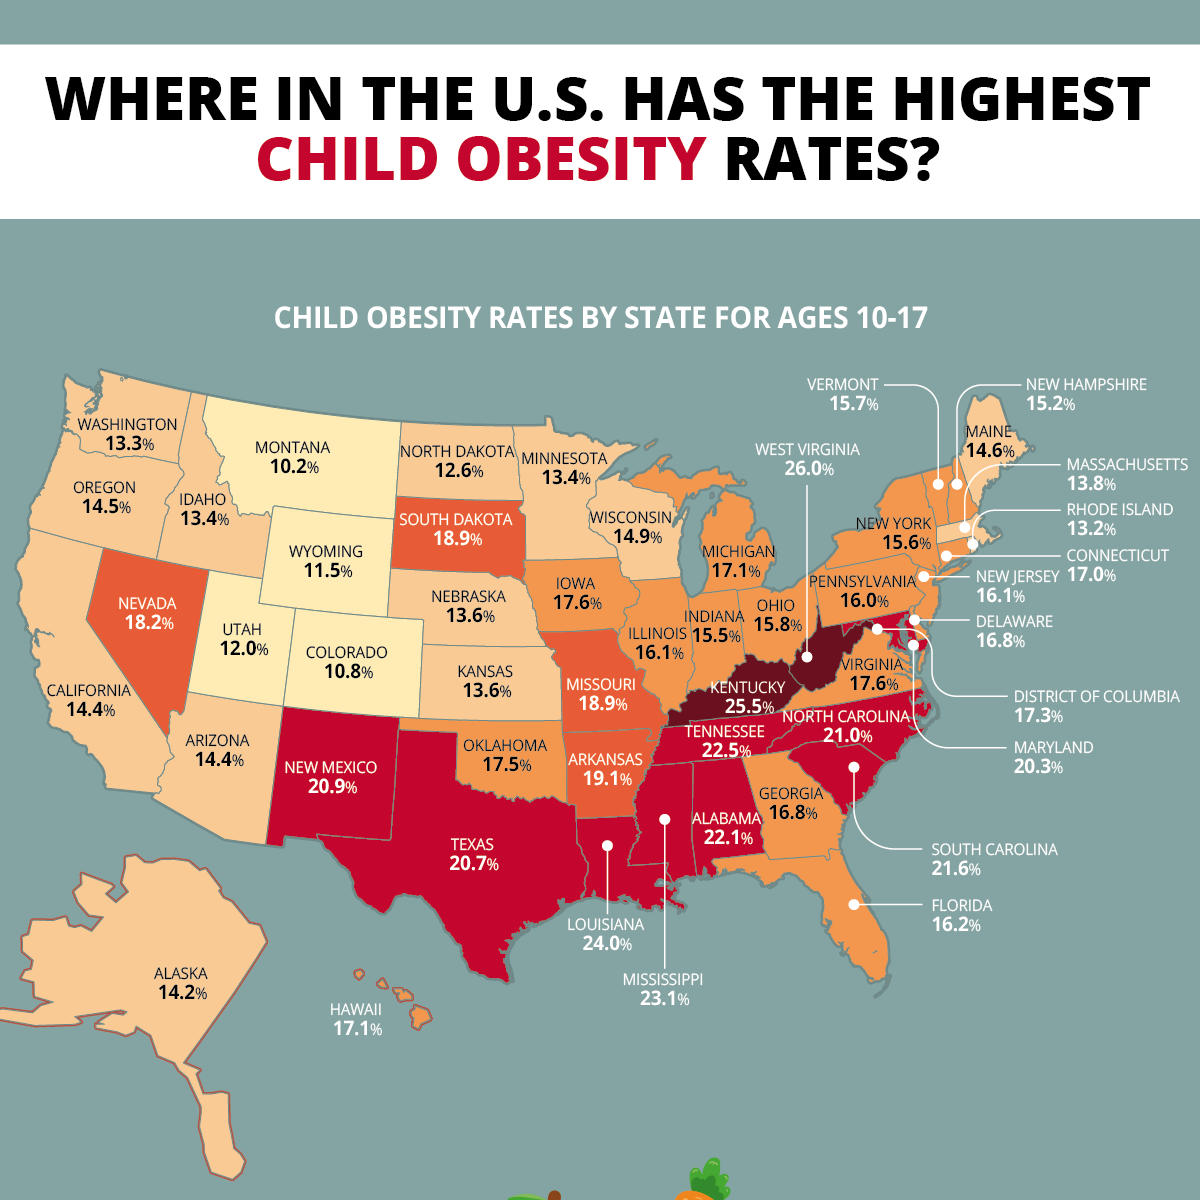 Where in the U.S. Has the Highest Childhood Obesity Rates?